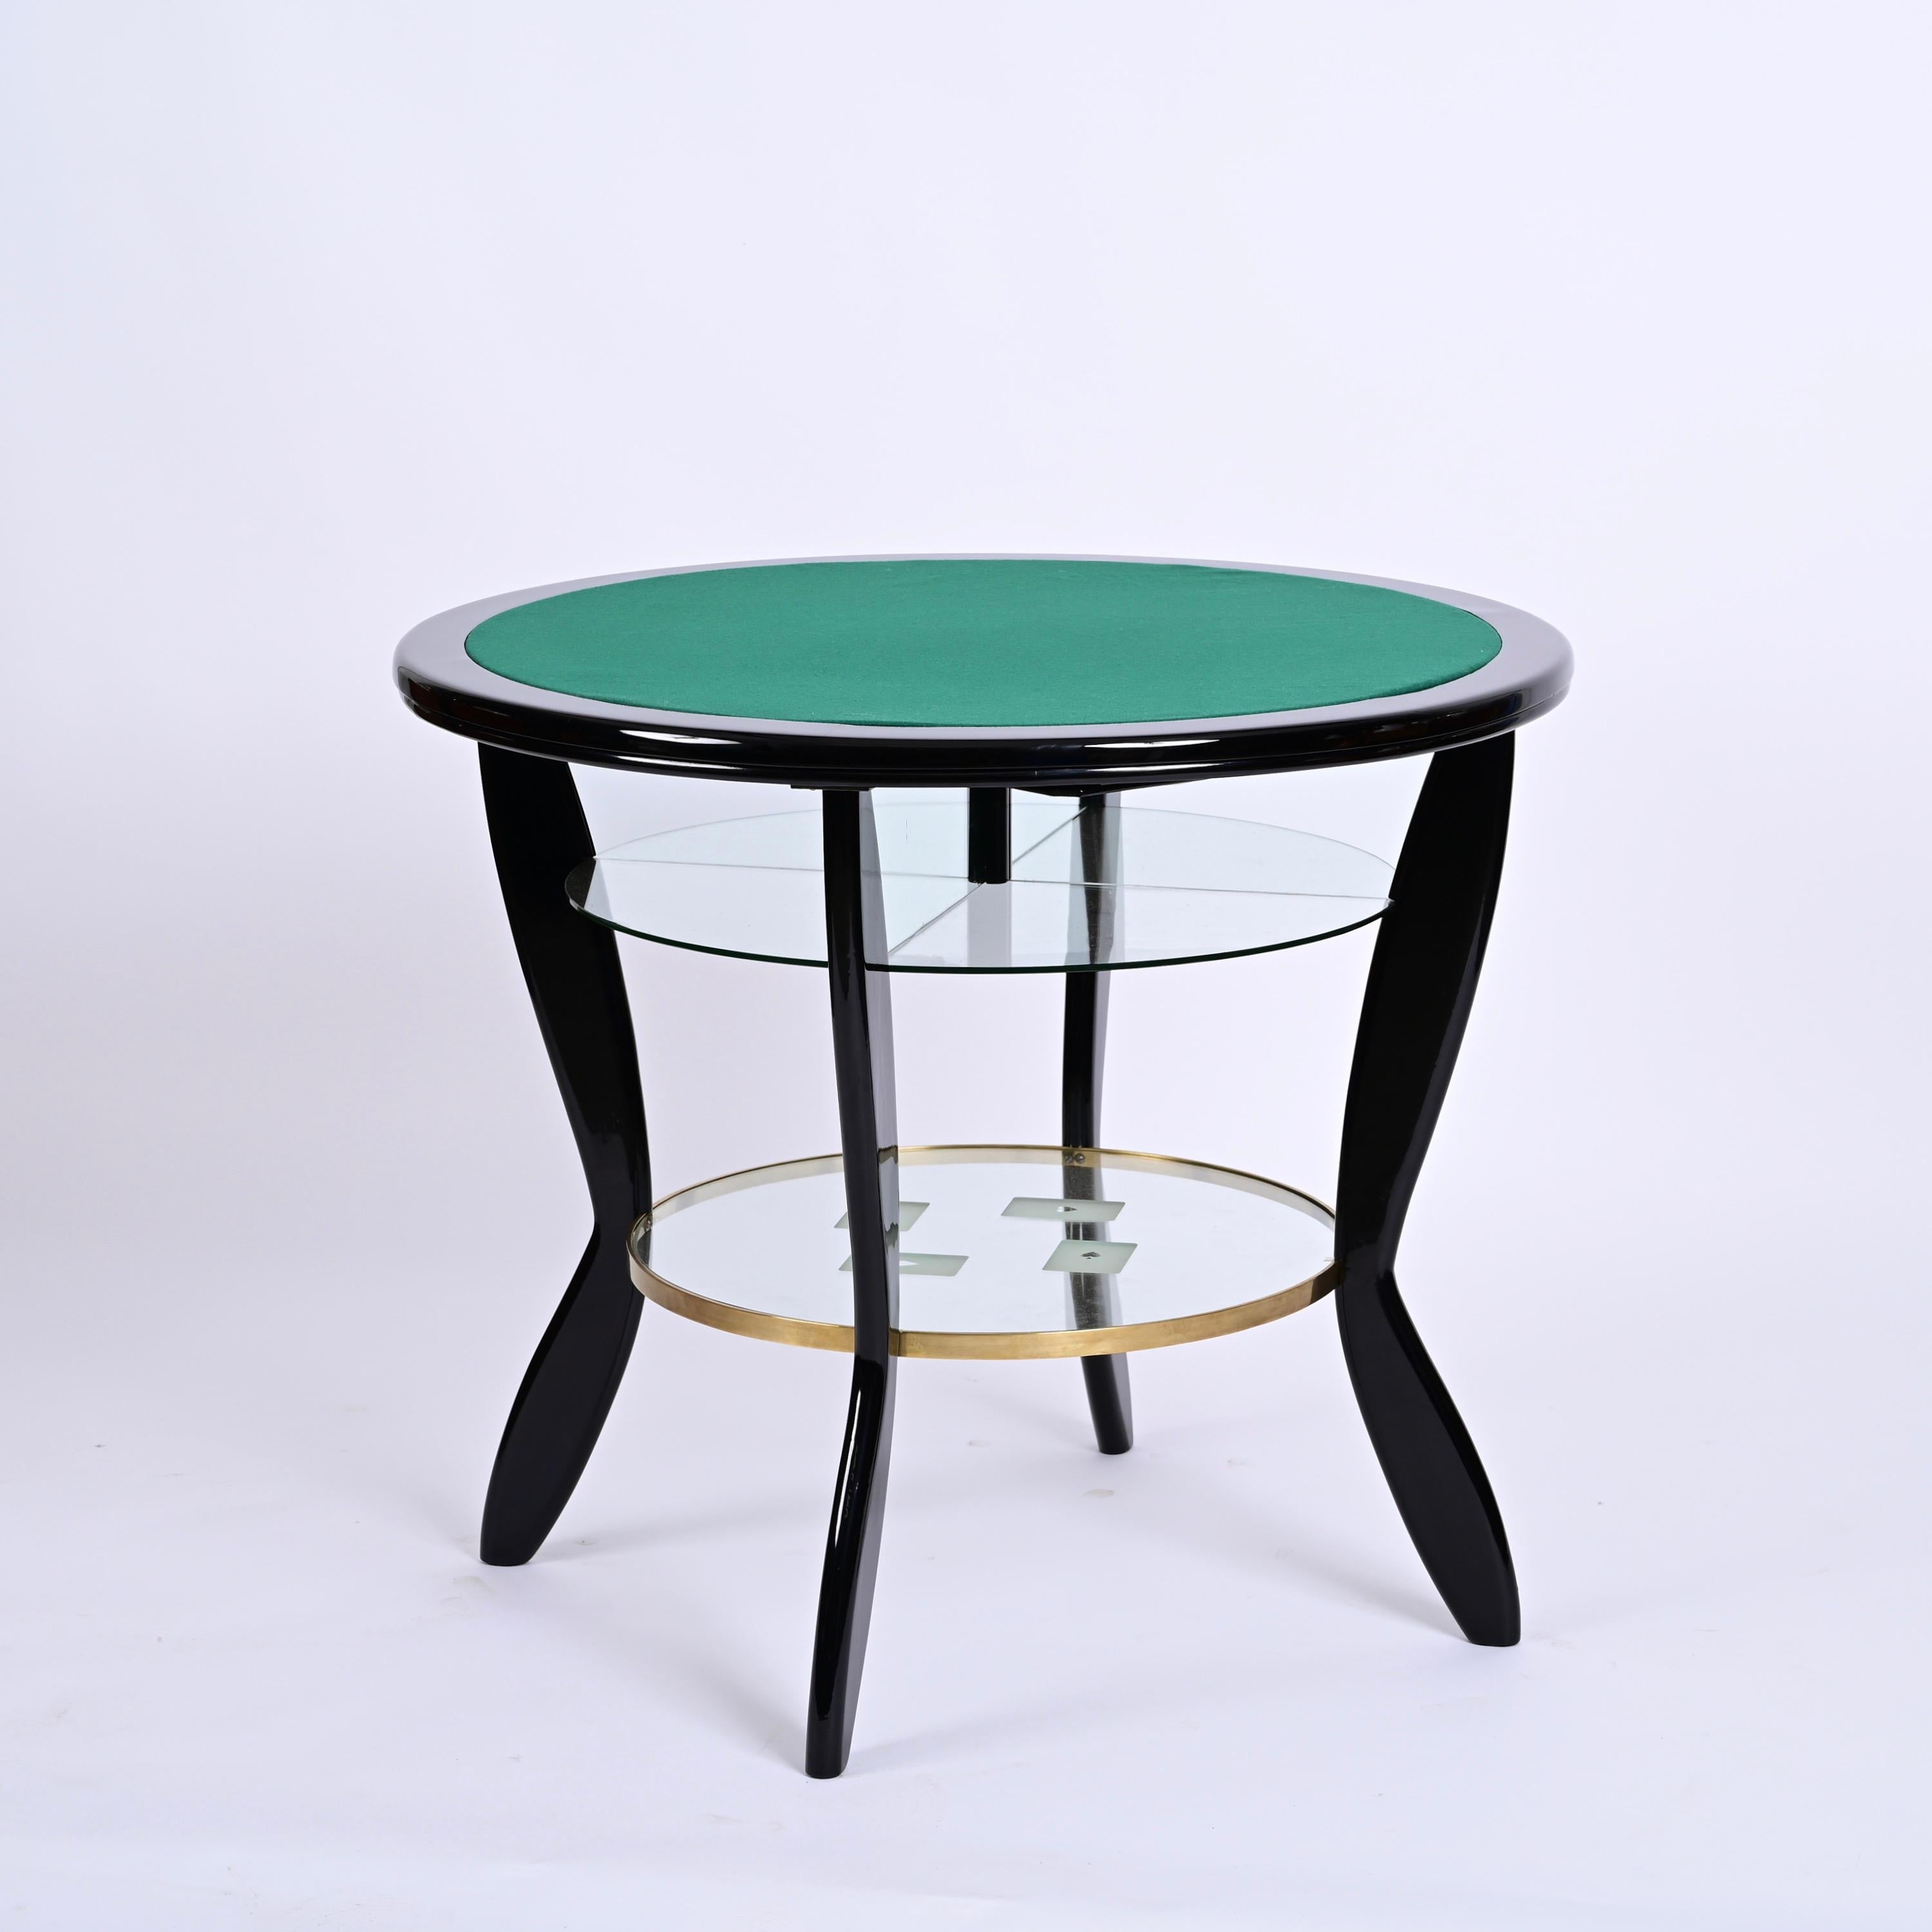 Gio Ponti Style Ebonized Beech and Brass Italian Game Table with Glass, 1950s For Sale 3